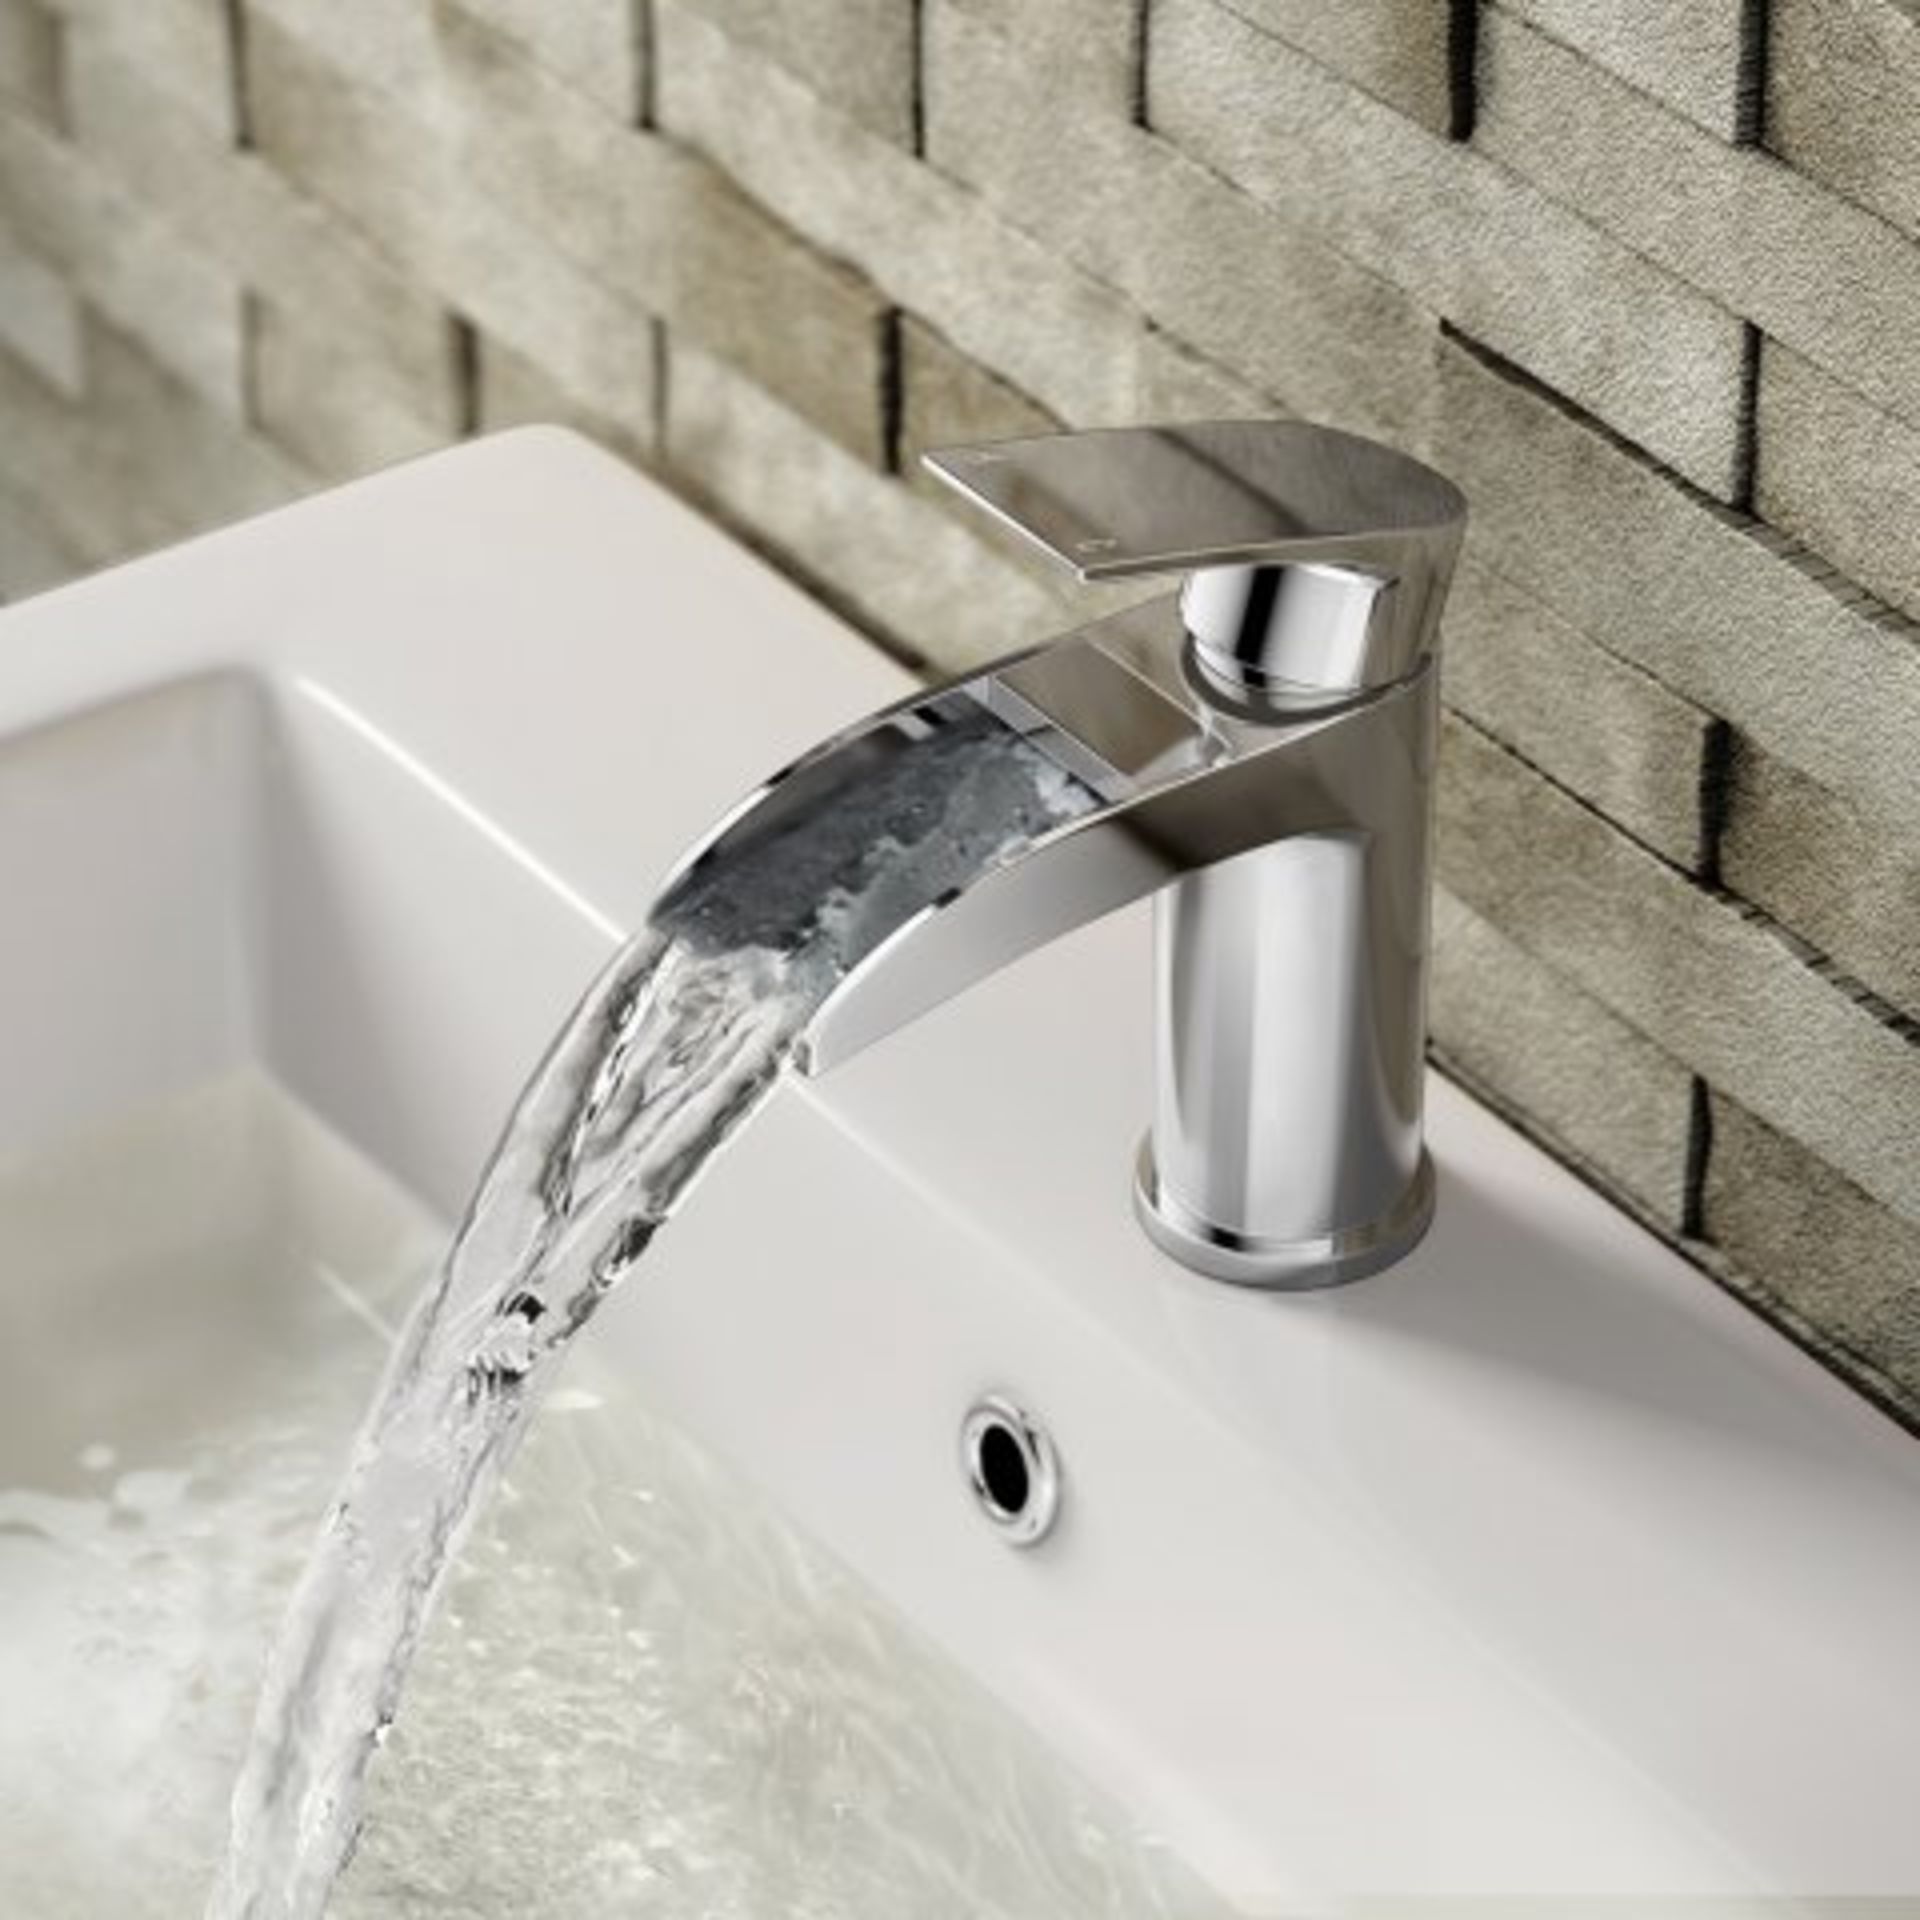 (H115) Avis II Waterfall Basin Mixer Tap Waterfall Feature Our range of waterfall taps add a touch - Image 3 of 4